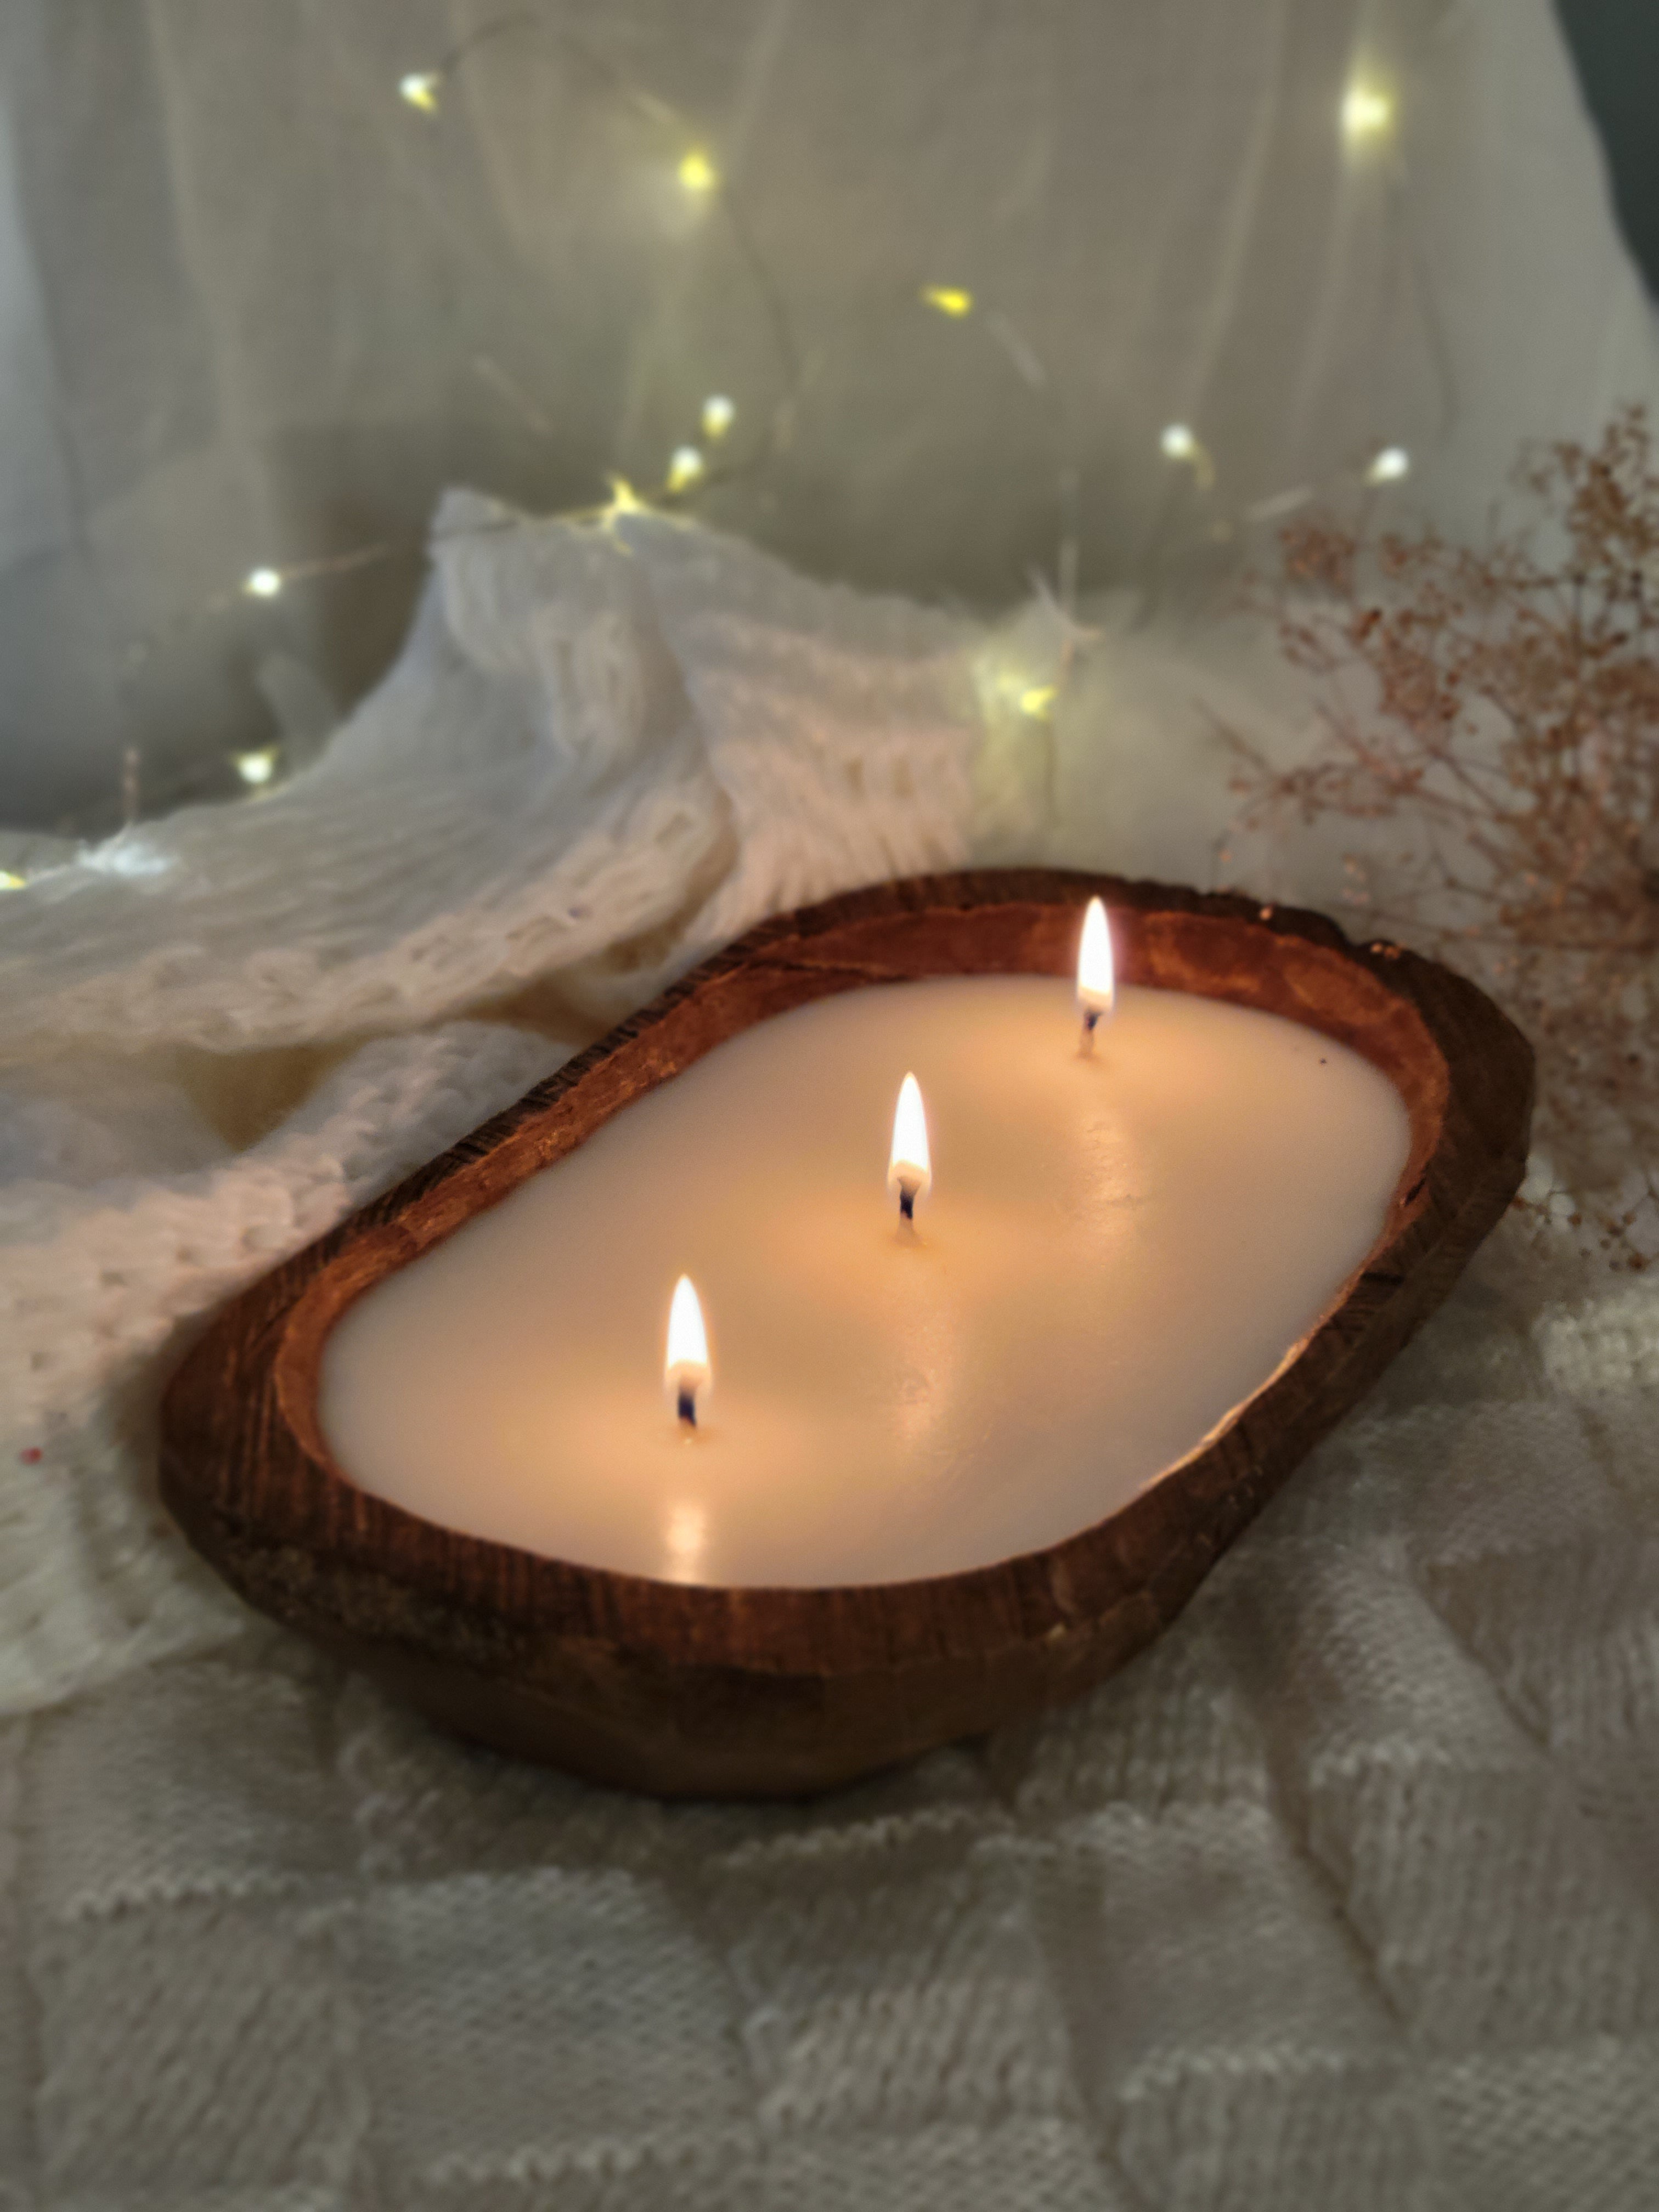 CANDLE REFILL KIT FOR HEART BOWLS